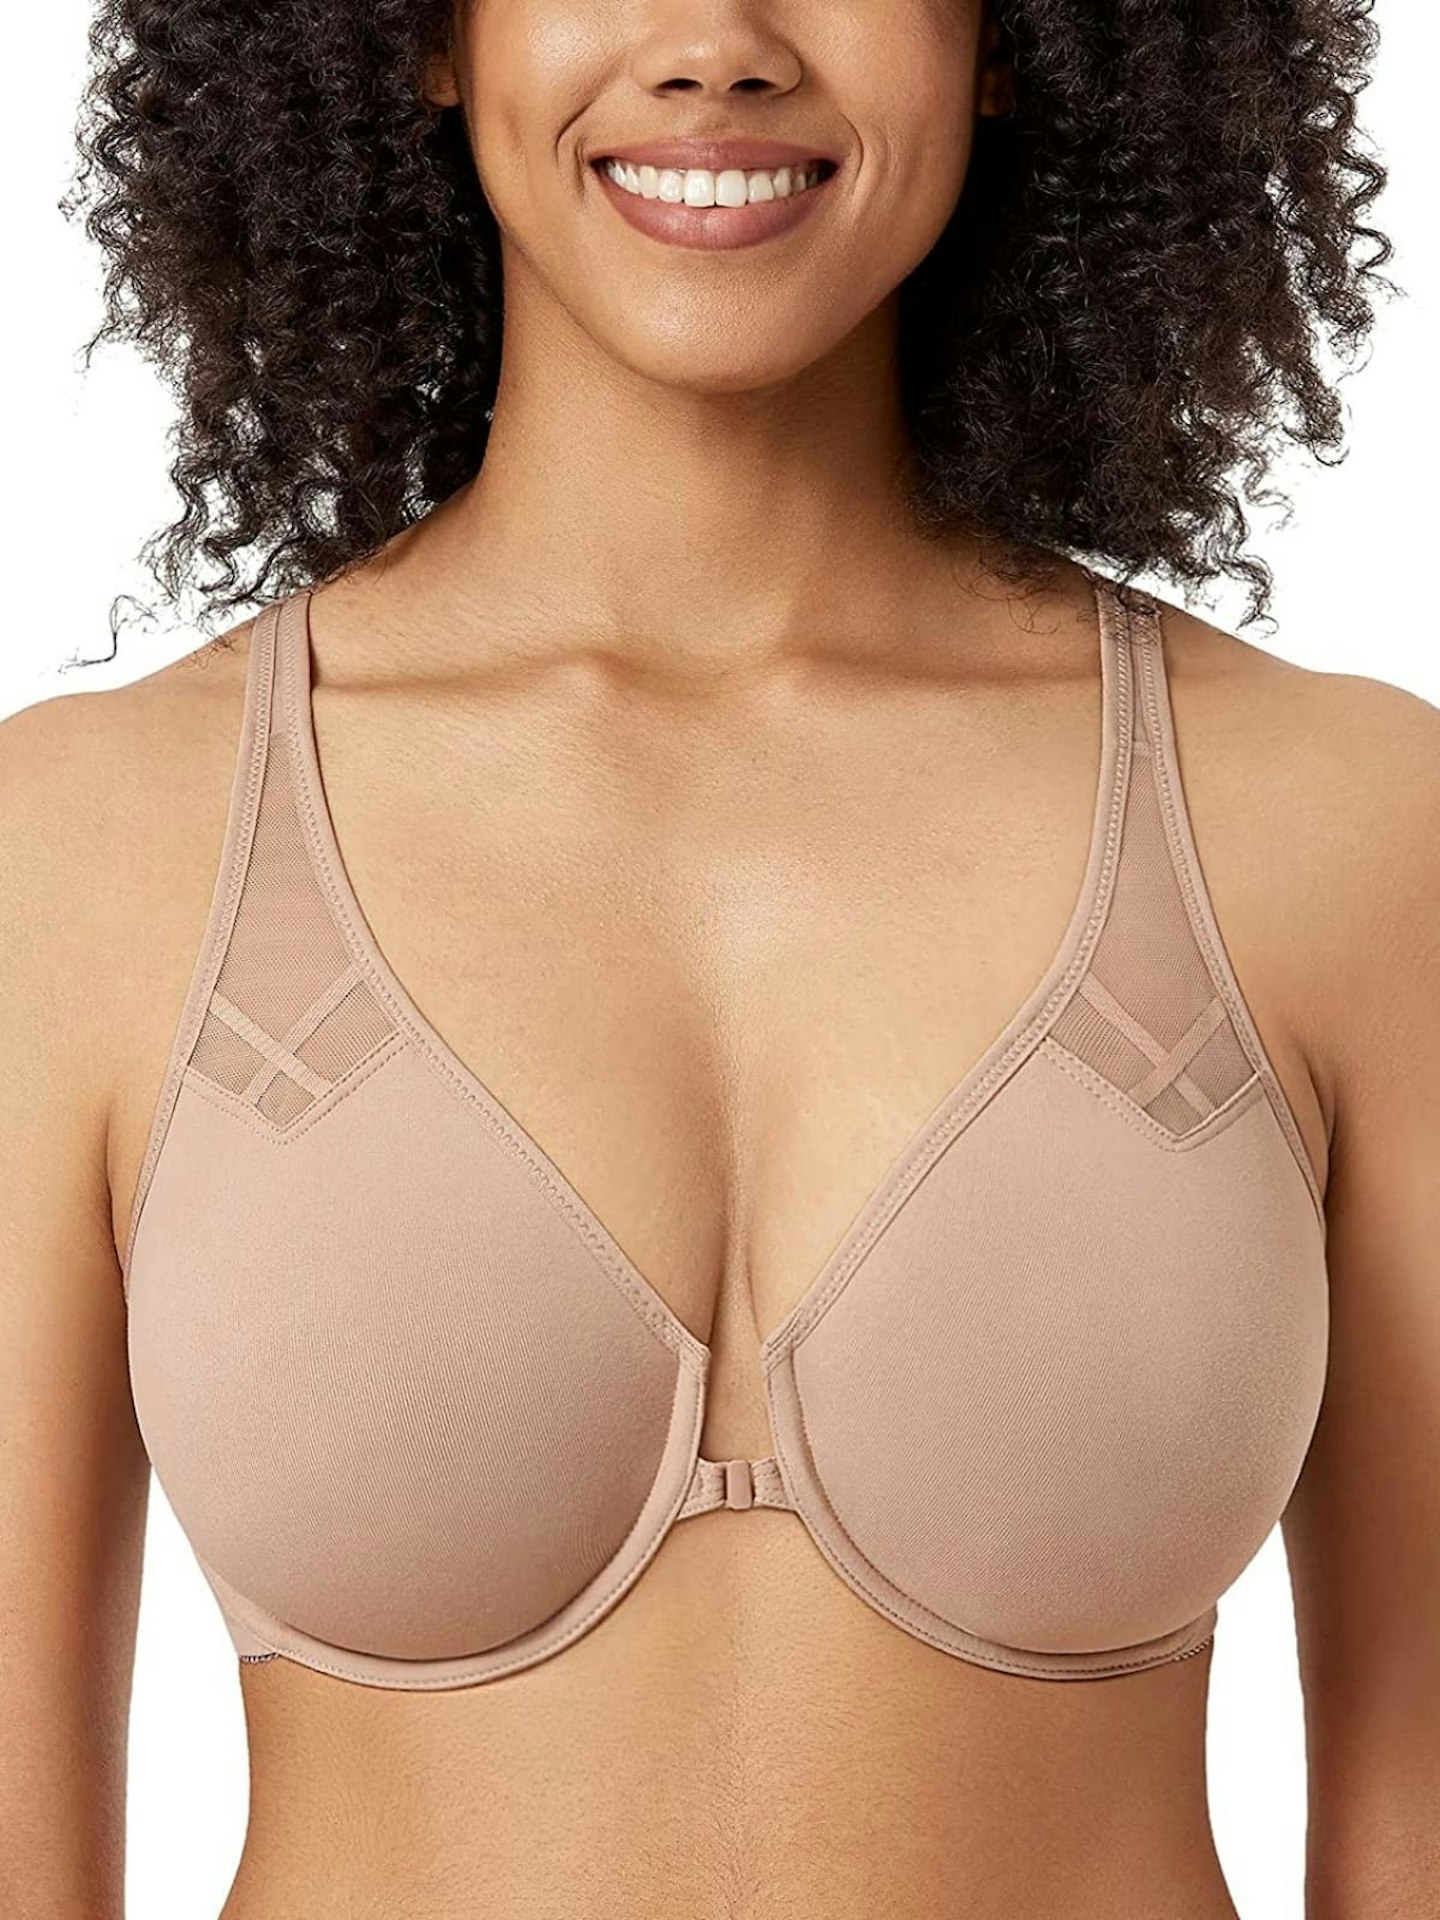 The Easy Hack That Transforms Any Bra Into A Racerback